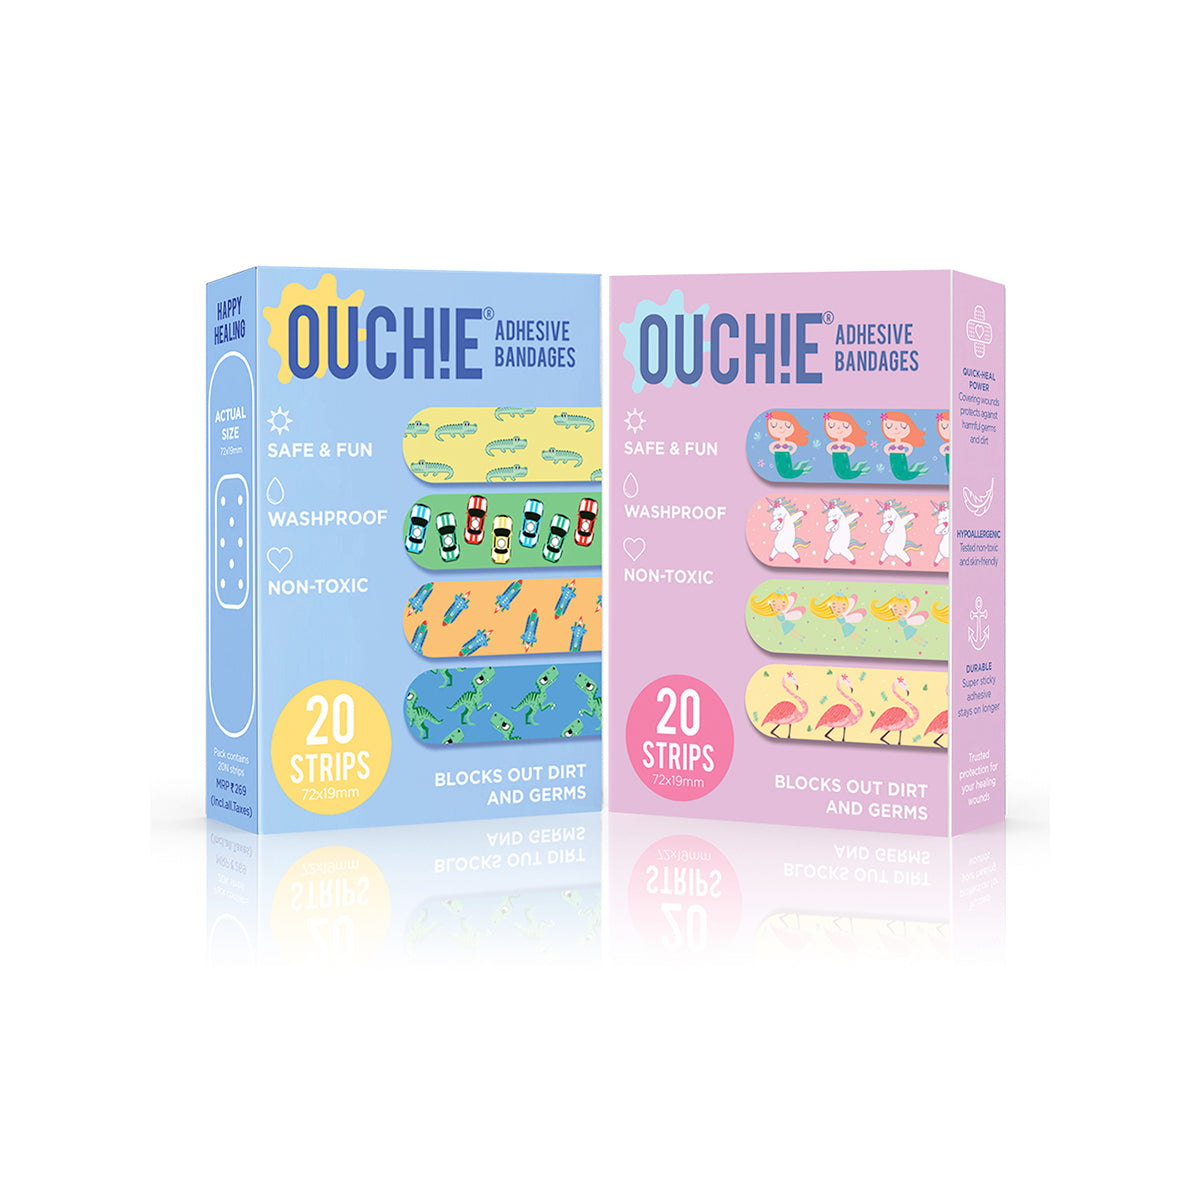 Ouchie Non-Toxic Printed Bandages COMBO Set of 2 (2 x 20= 40 Pack)- (BLUE & LAVENDER)